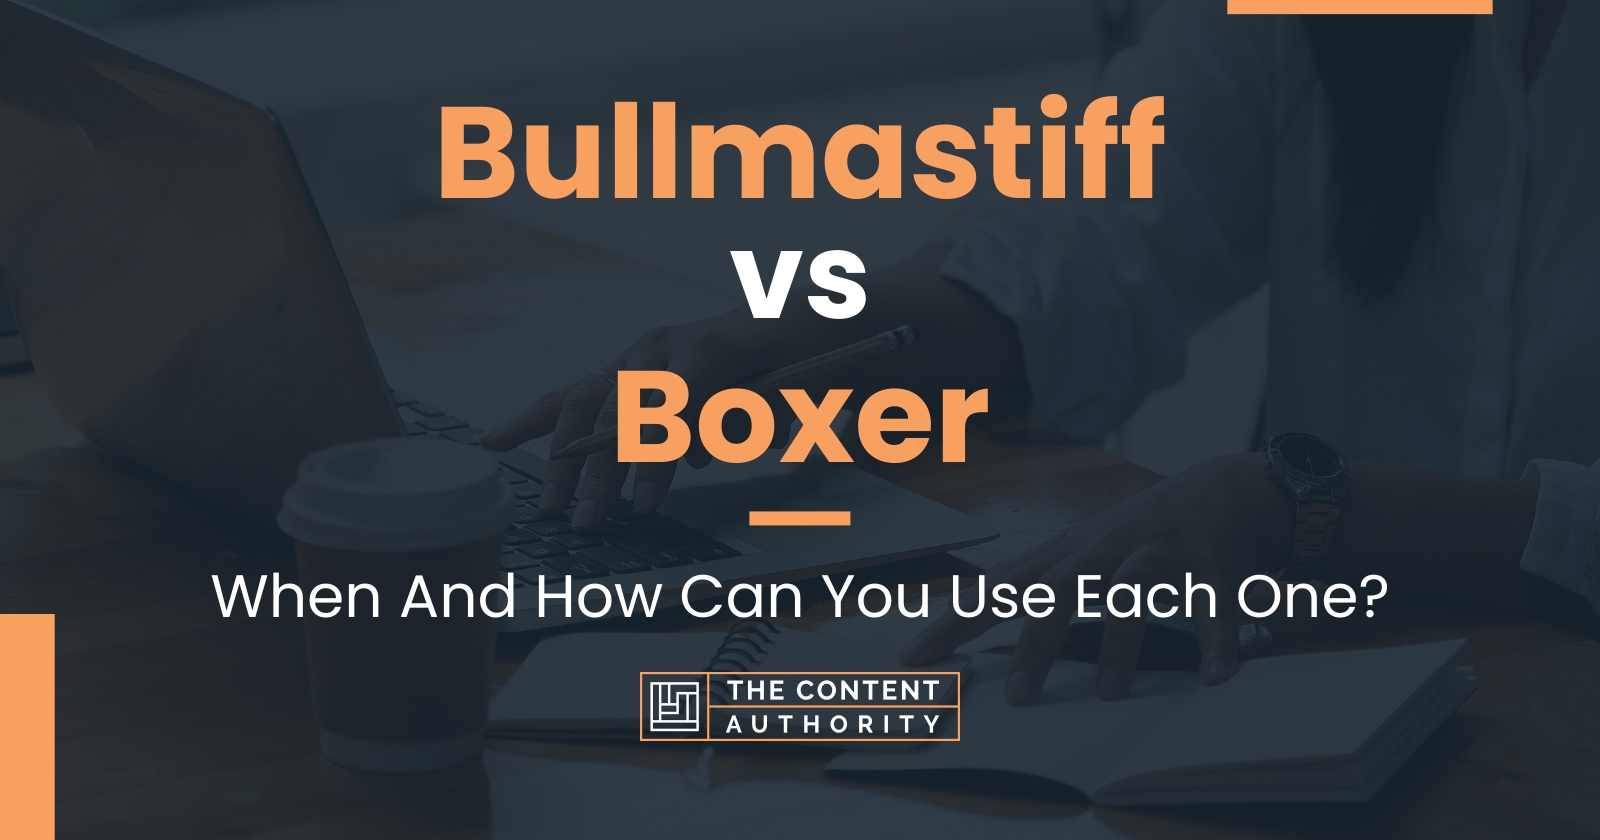 Bullmastiff vs Boxer: When And How Can You Use Each One?